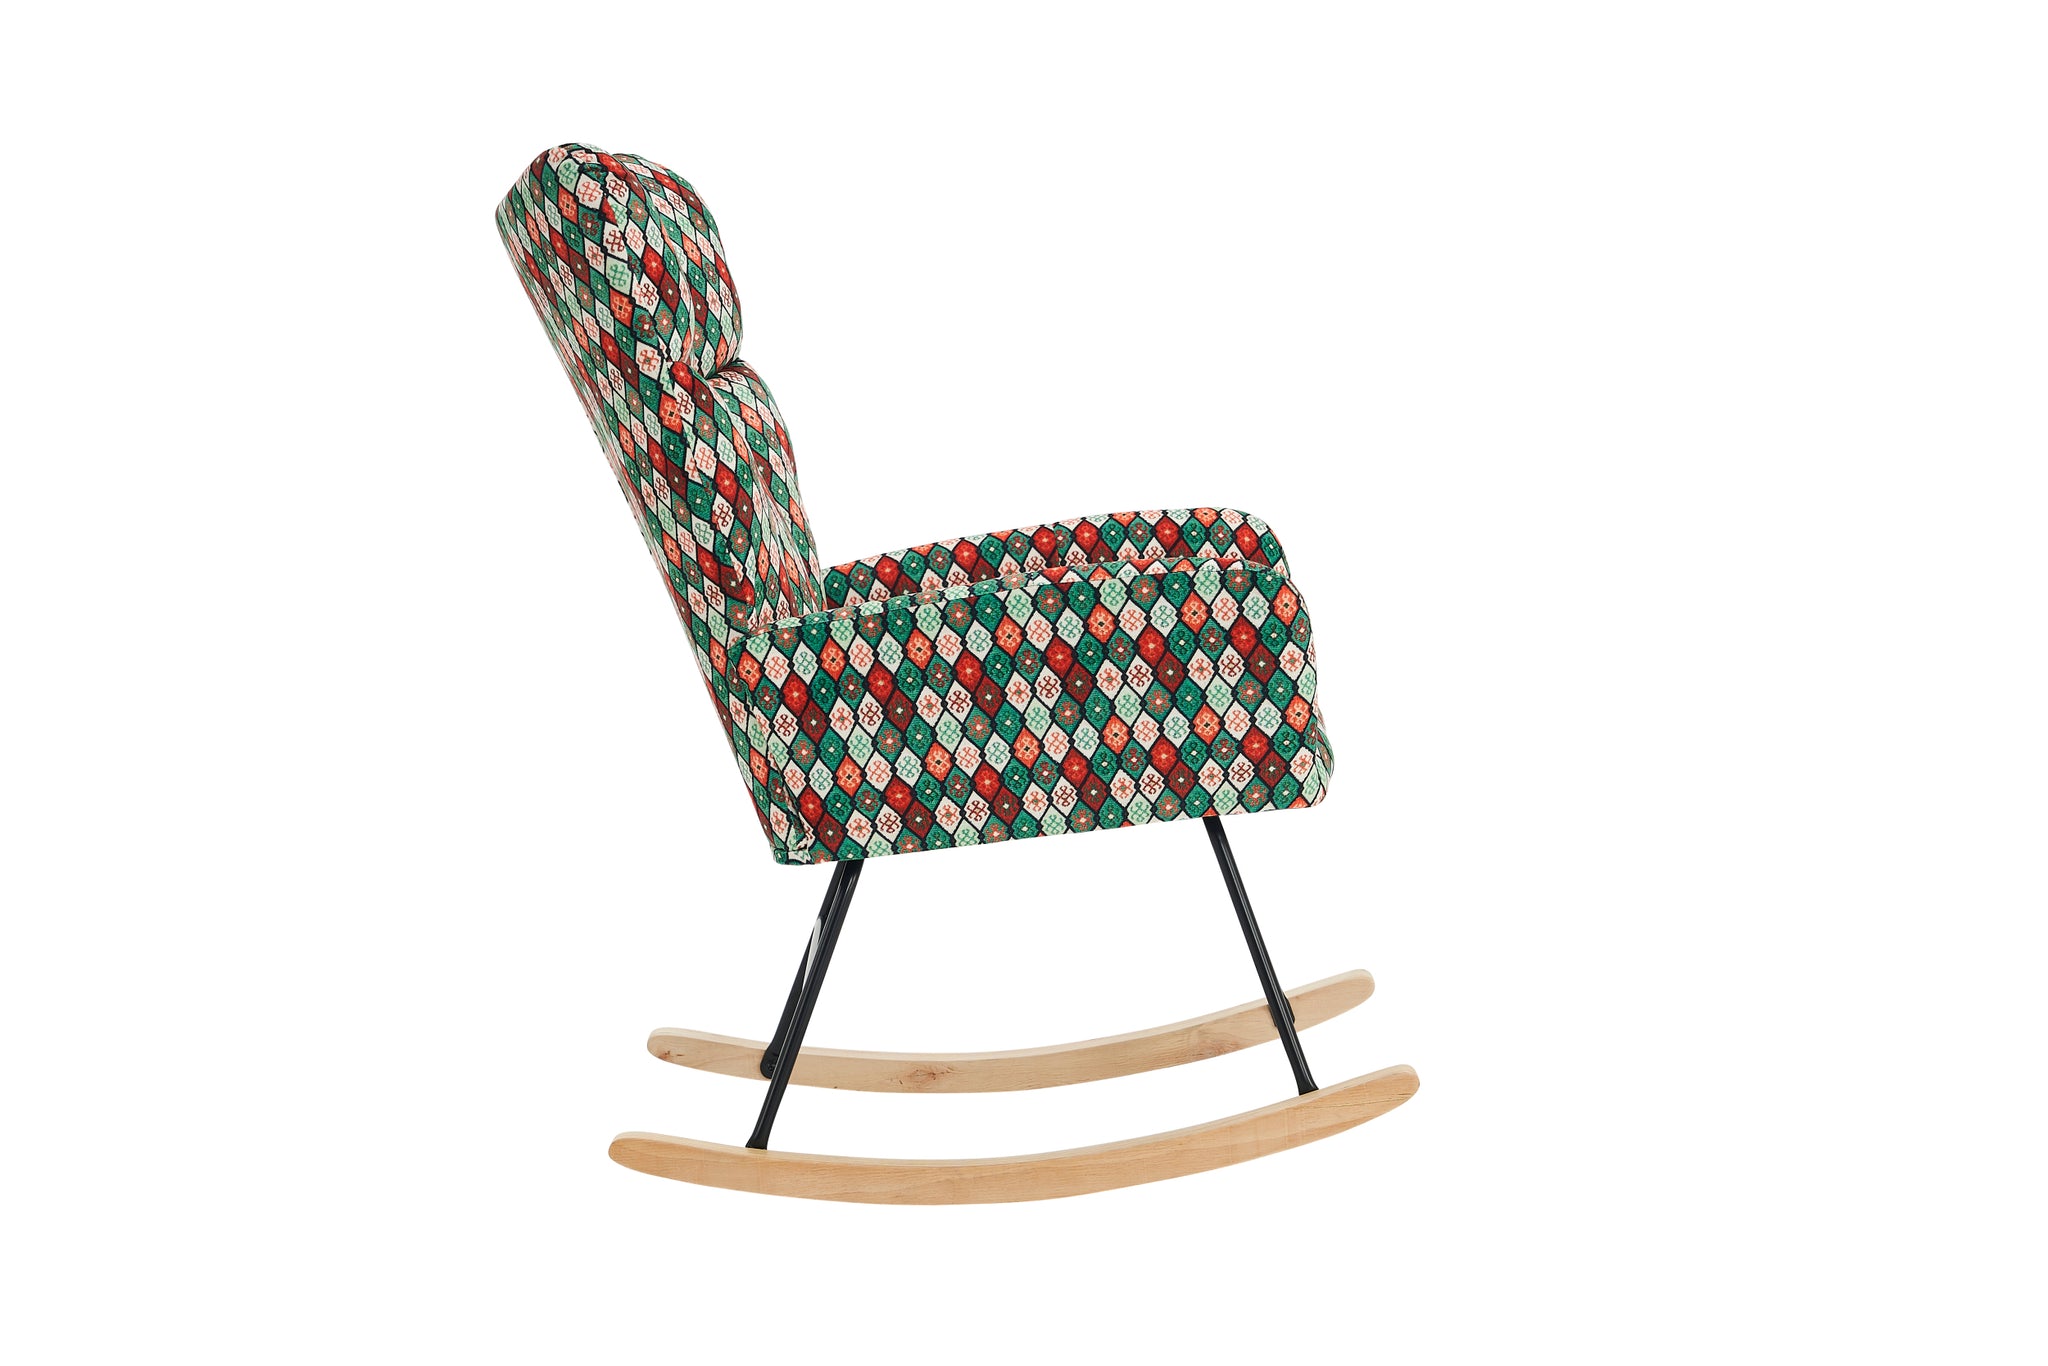 Rocking Chair Nursery, Solid Wood Legs Reading Chair colorful-primary living space-wipe